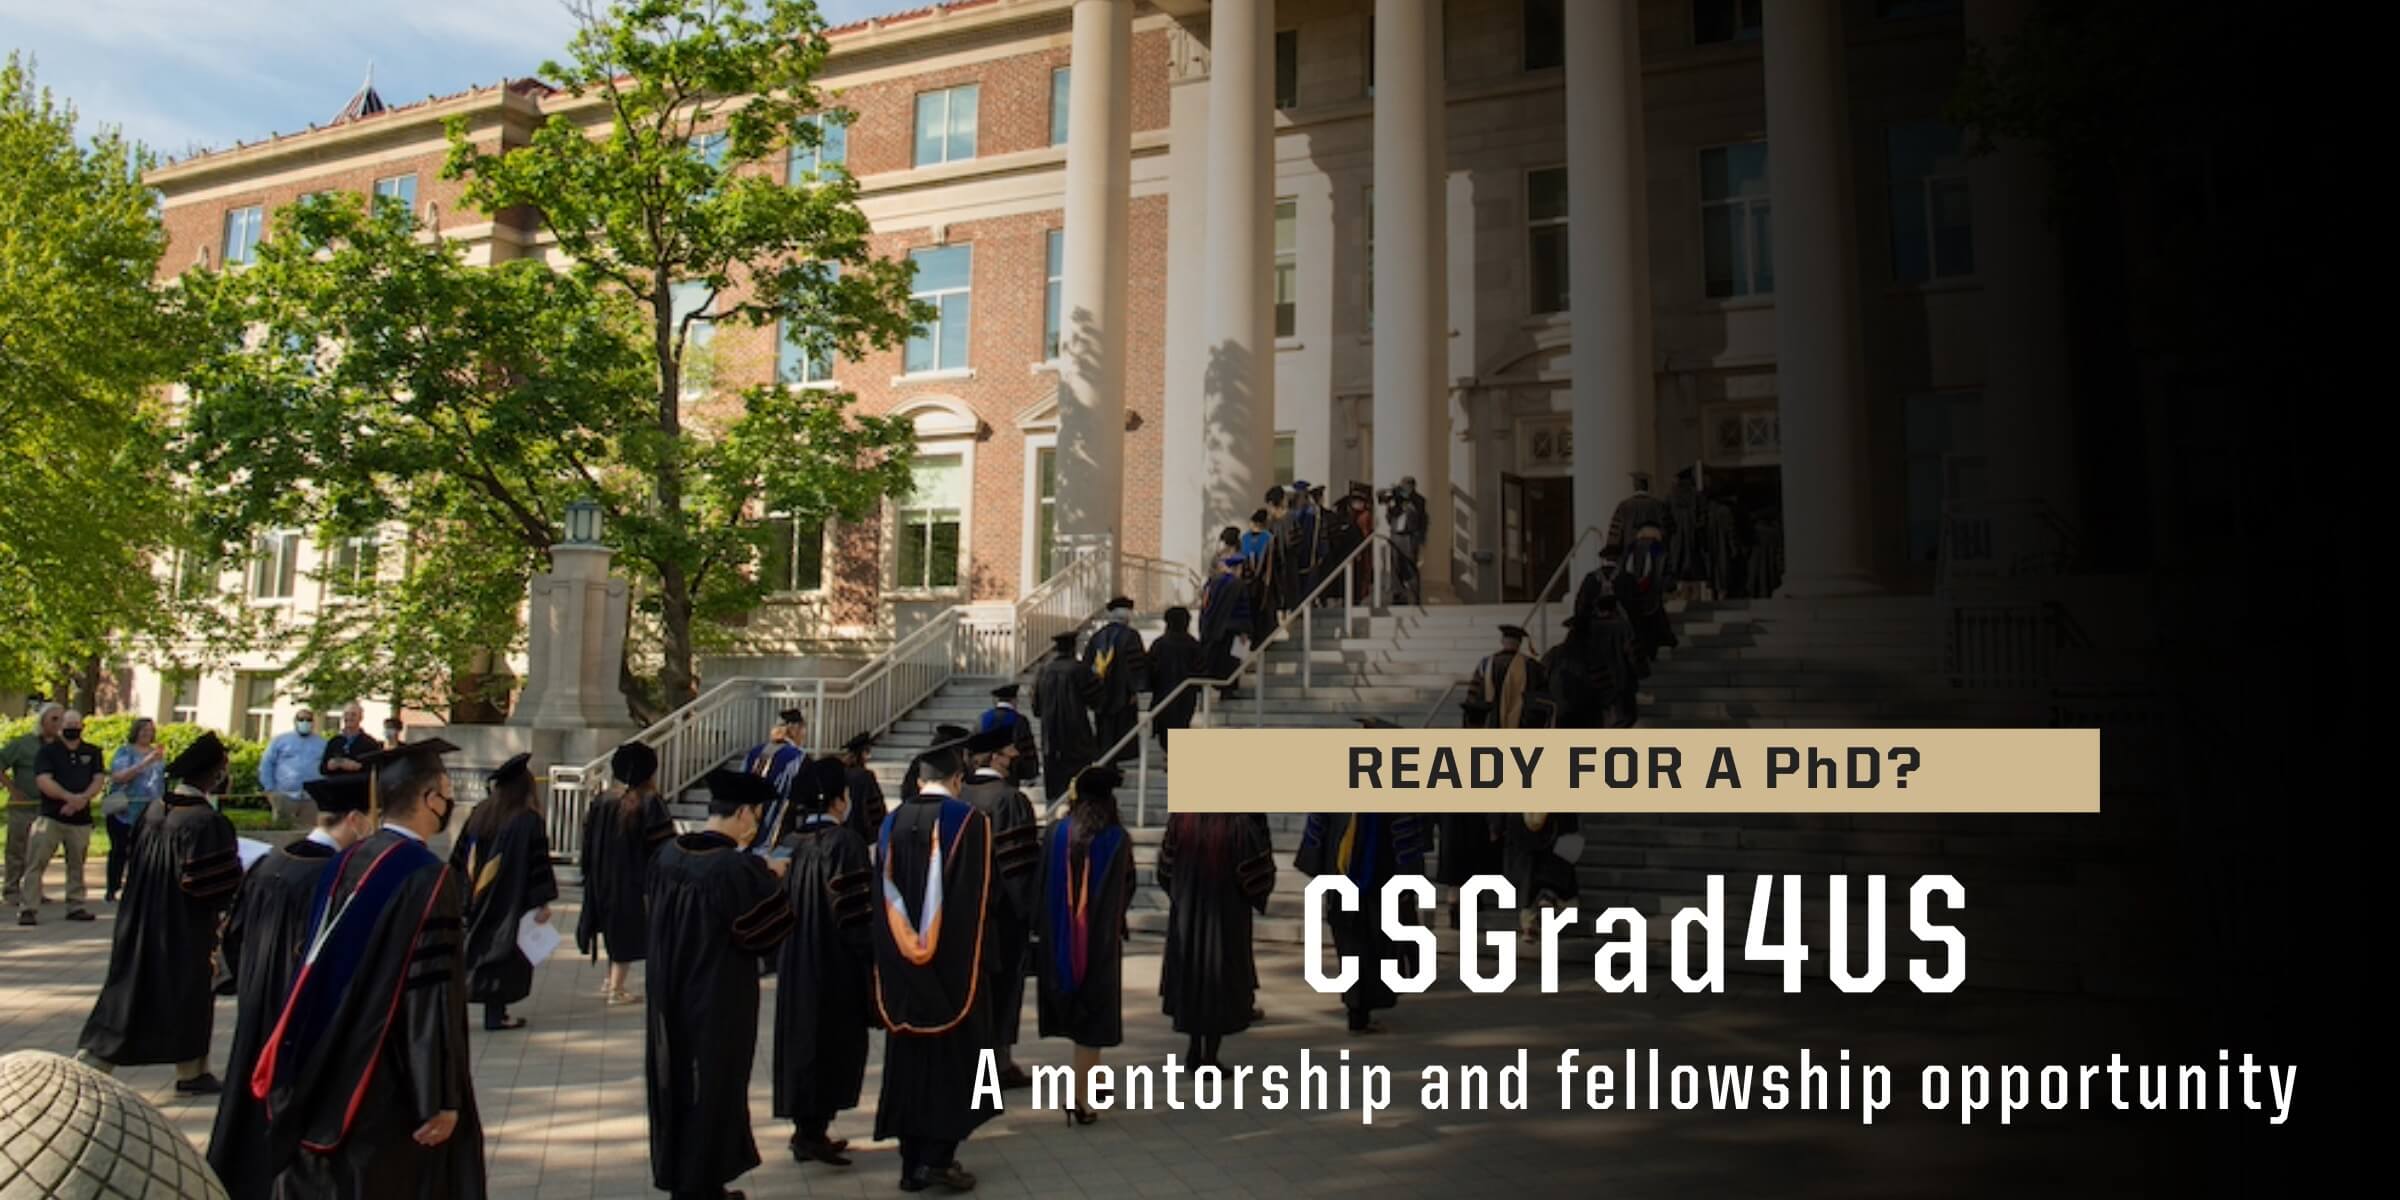 CSGrad4US aims to increase the number and diversity of domestic graduate students pursuing research and innovation careers in computer and information science and engineering fields.